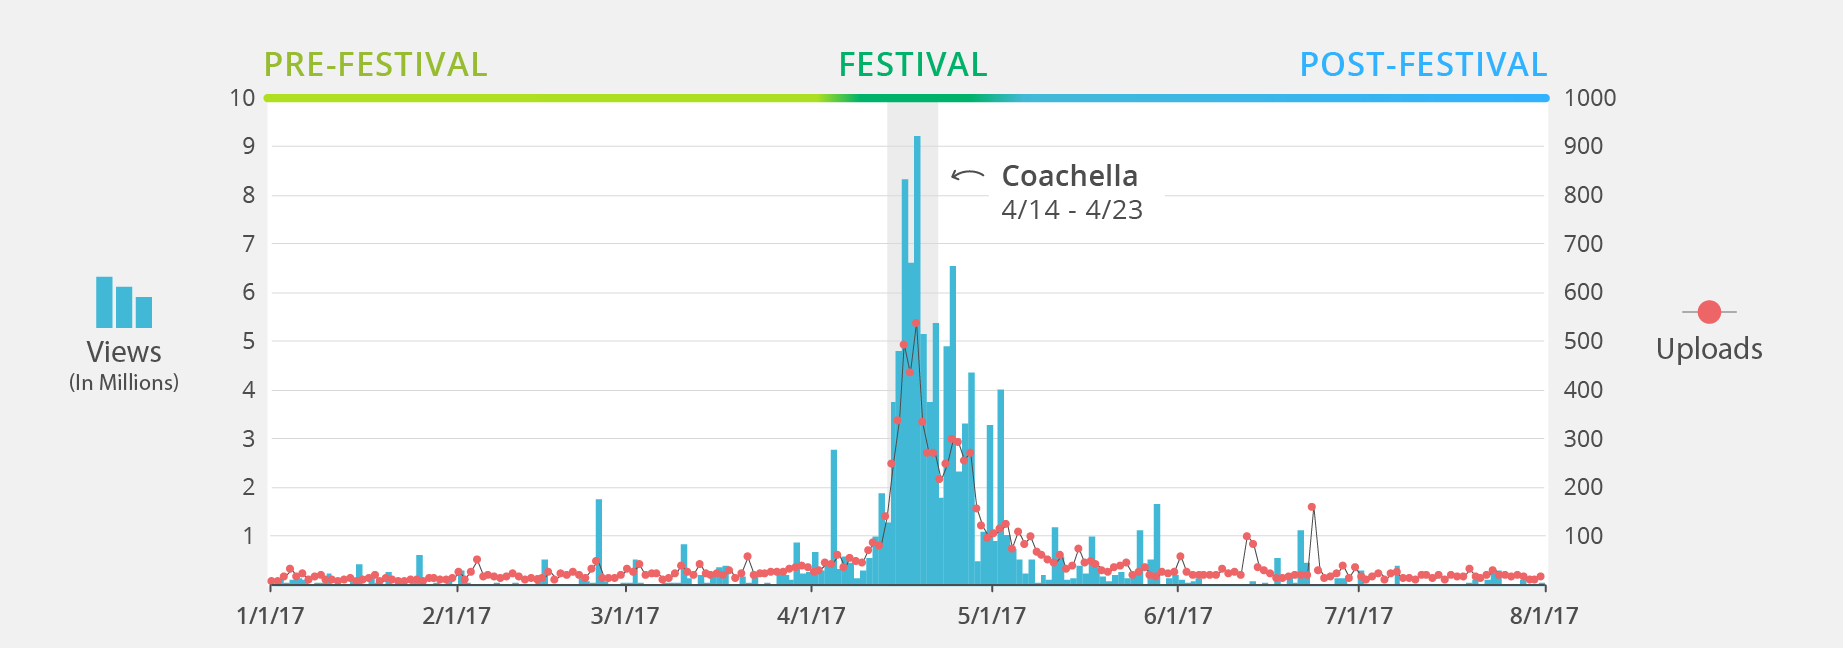 Bell curve of views and uploads for Coachella content over the course of 2017 | DeviceDaily.com